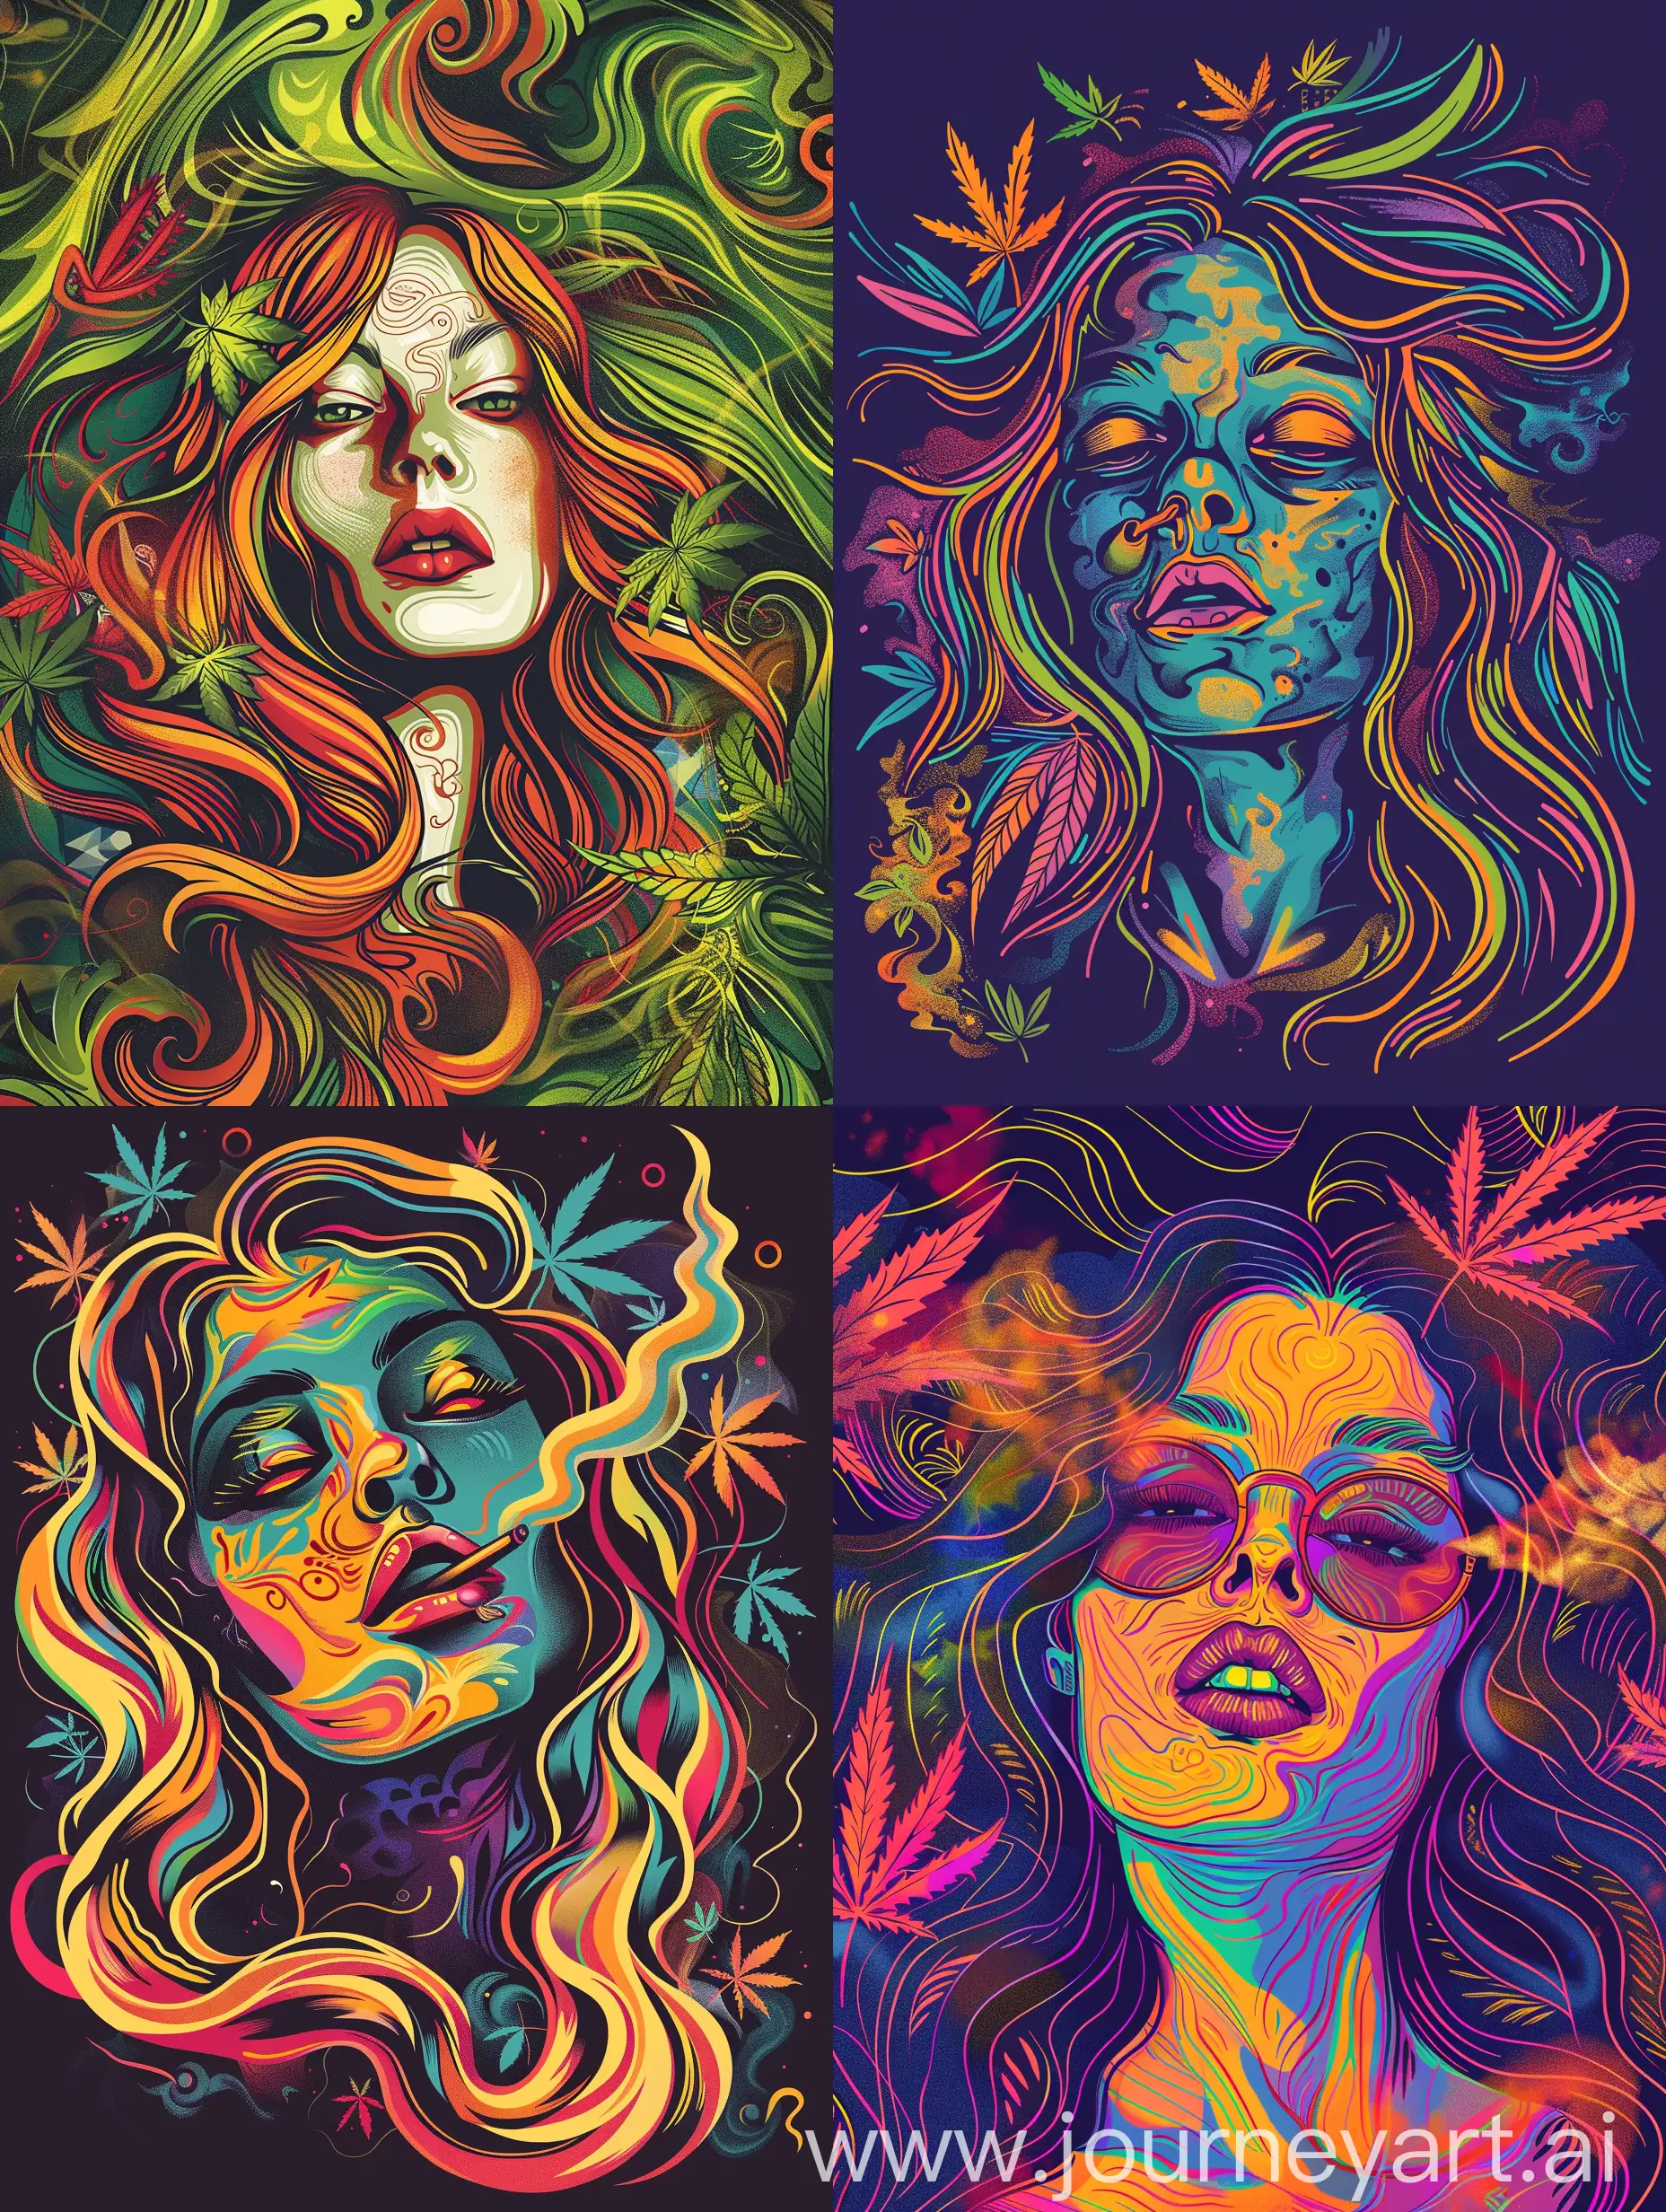 a vibrant and artistic graphic design for a t-shirt featuring a bohemian-style girl smoking herb. She should have a relaxed and carefree vibe, with flowing hair and expressive eyes. The background should be a mix of psychedelic and nature-inspired elements, with bold colors and swirling patterns that evoke a sense of creativity and freedom. Incorporate subtle cannabis leaves into the design to emphasize the theme. The overall style should be a blend of surrealism and modern street art.